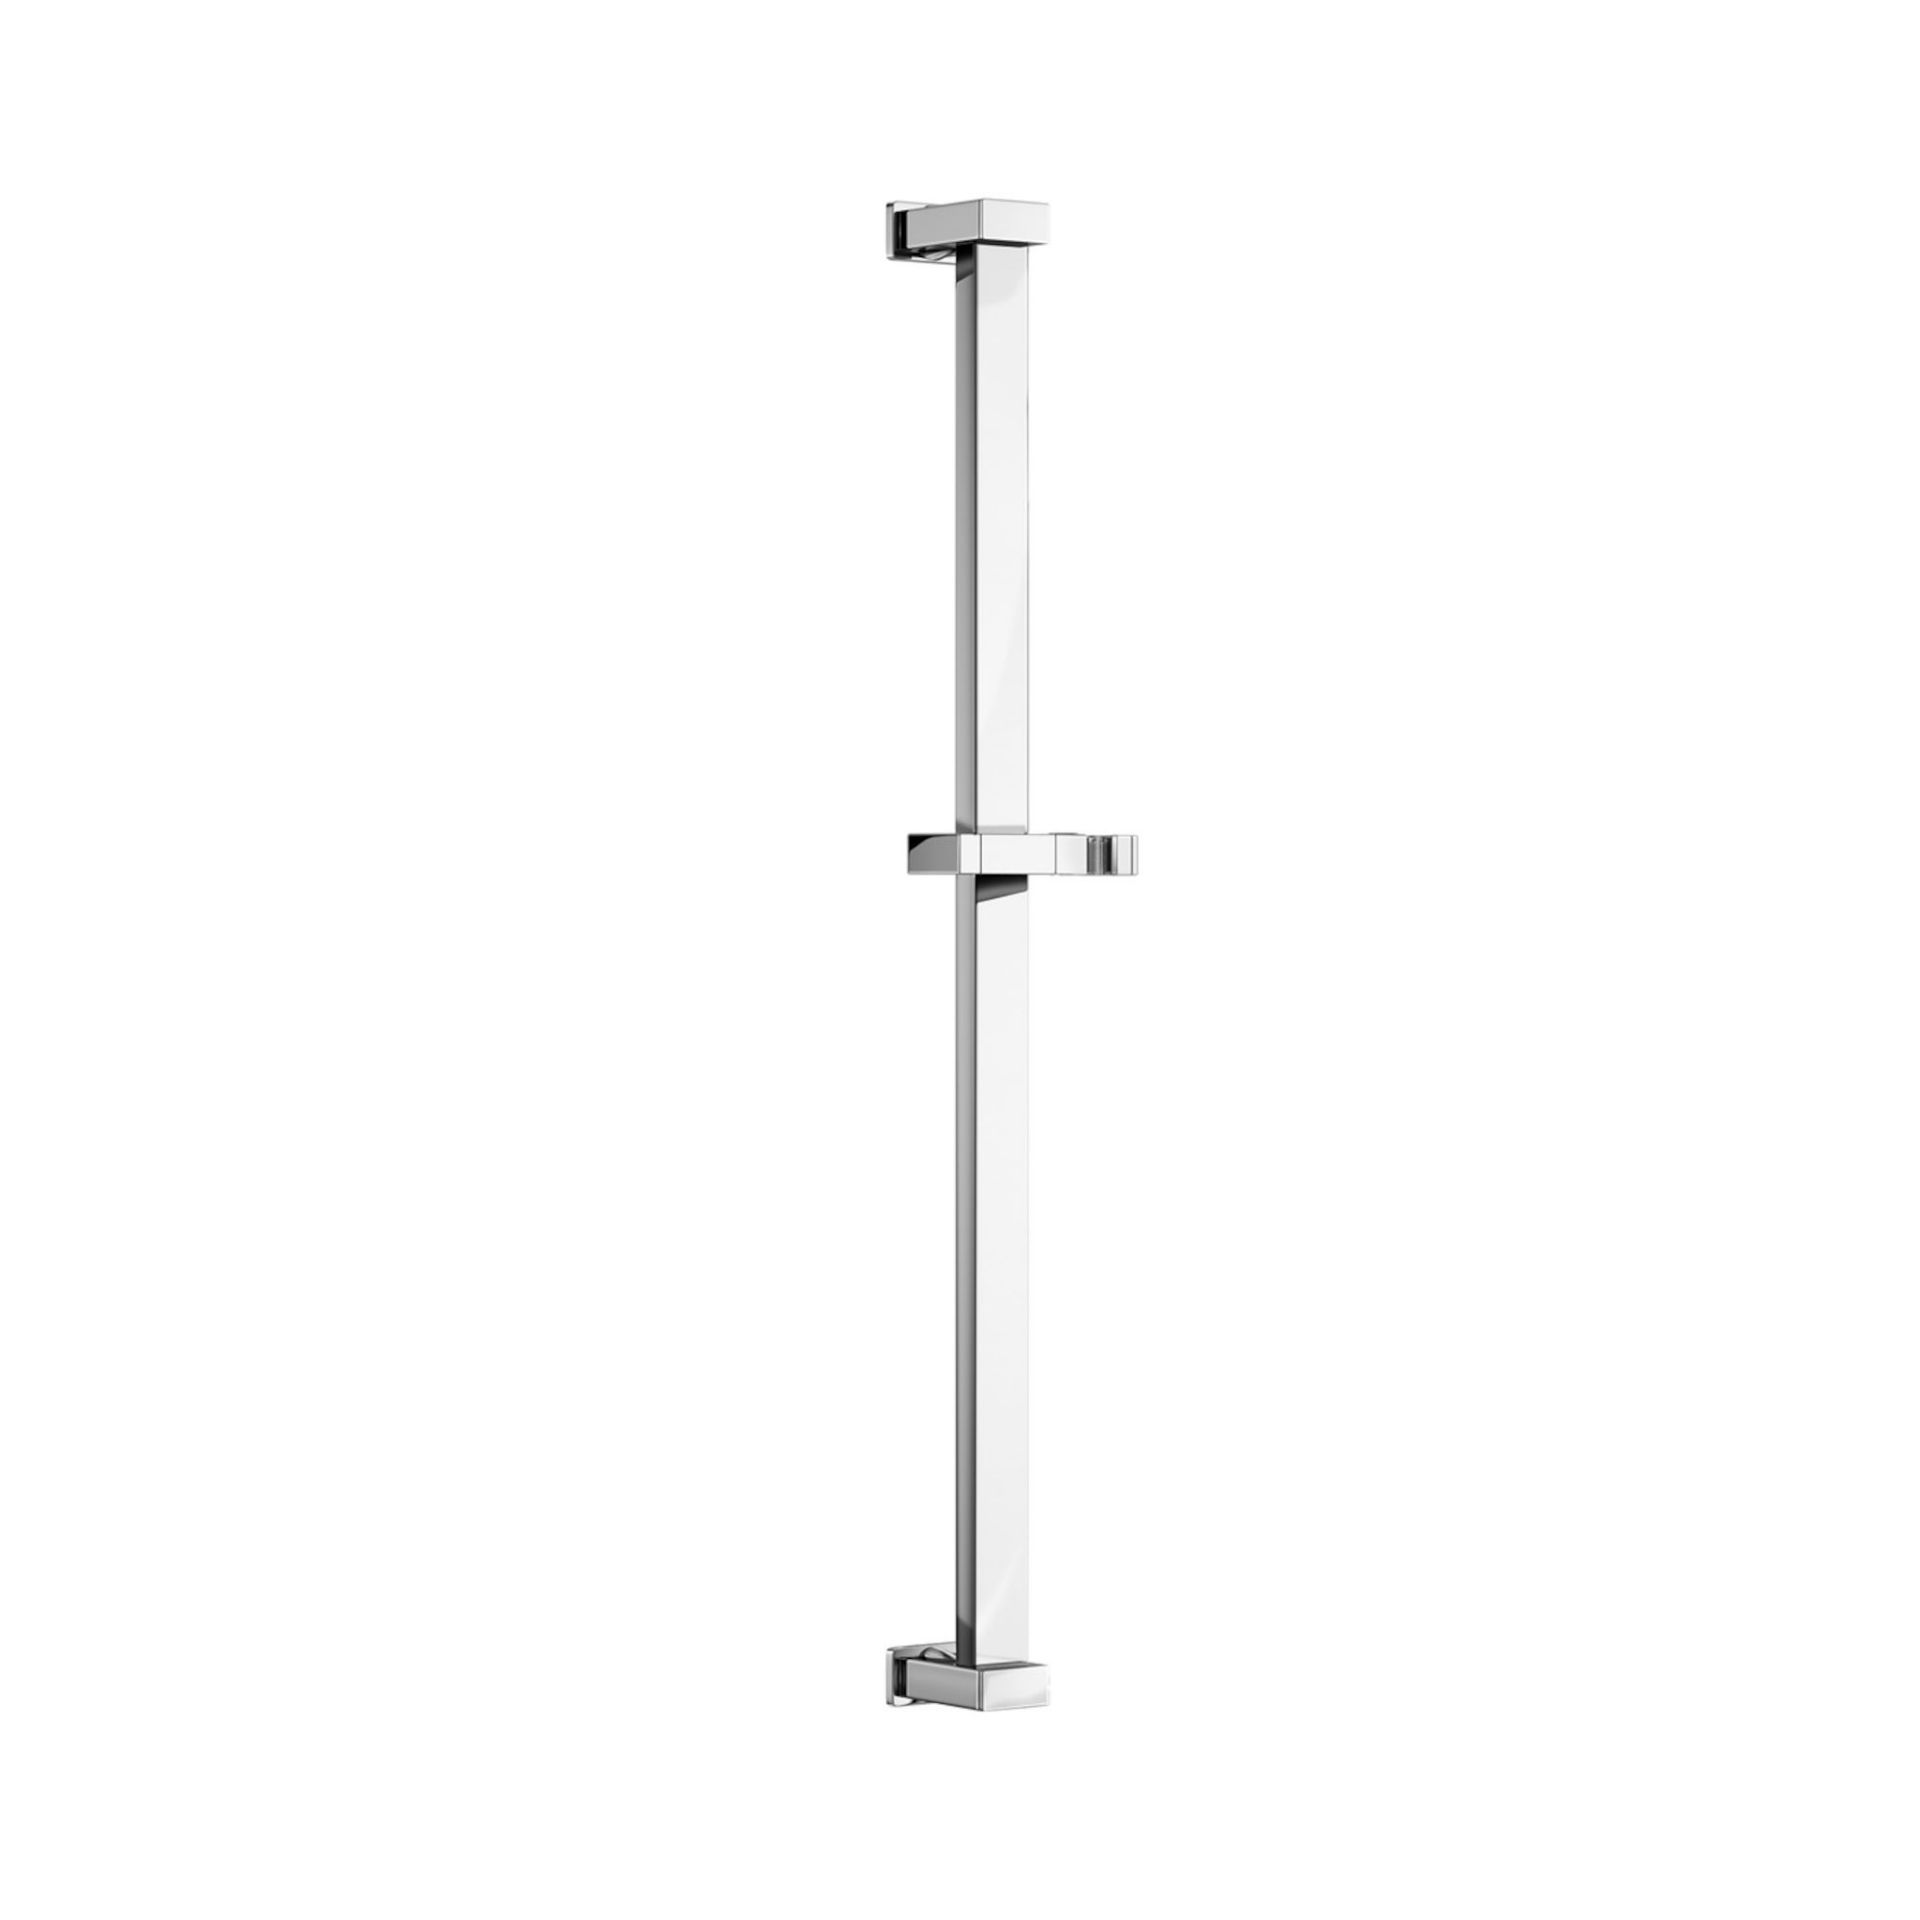 (U1013) Square Stainless Steel Riser Rail Premium stainless steel body Finished in high quali...